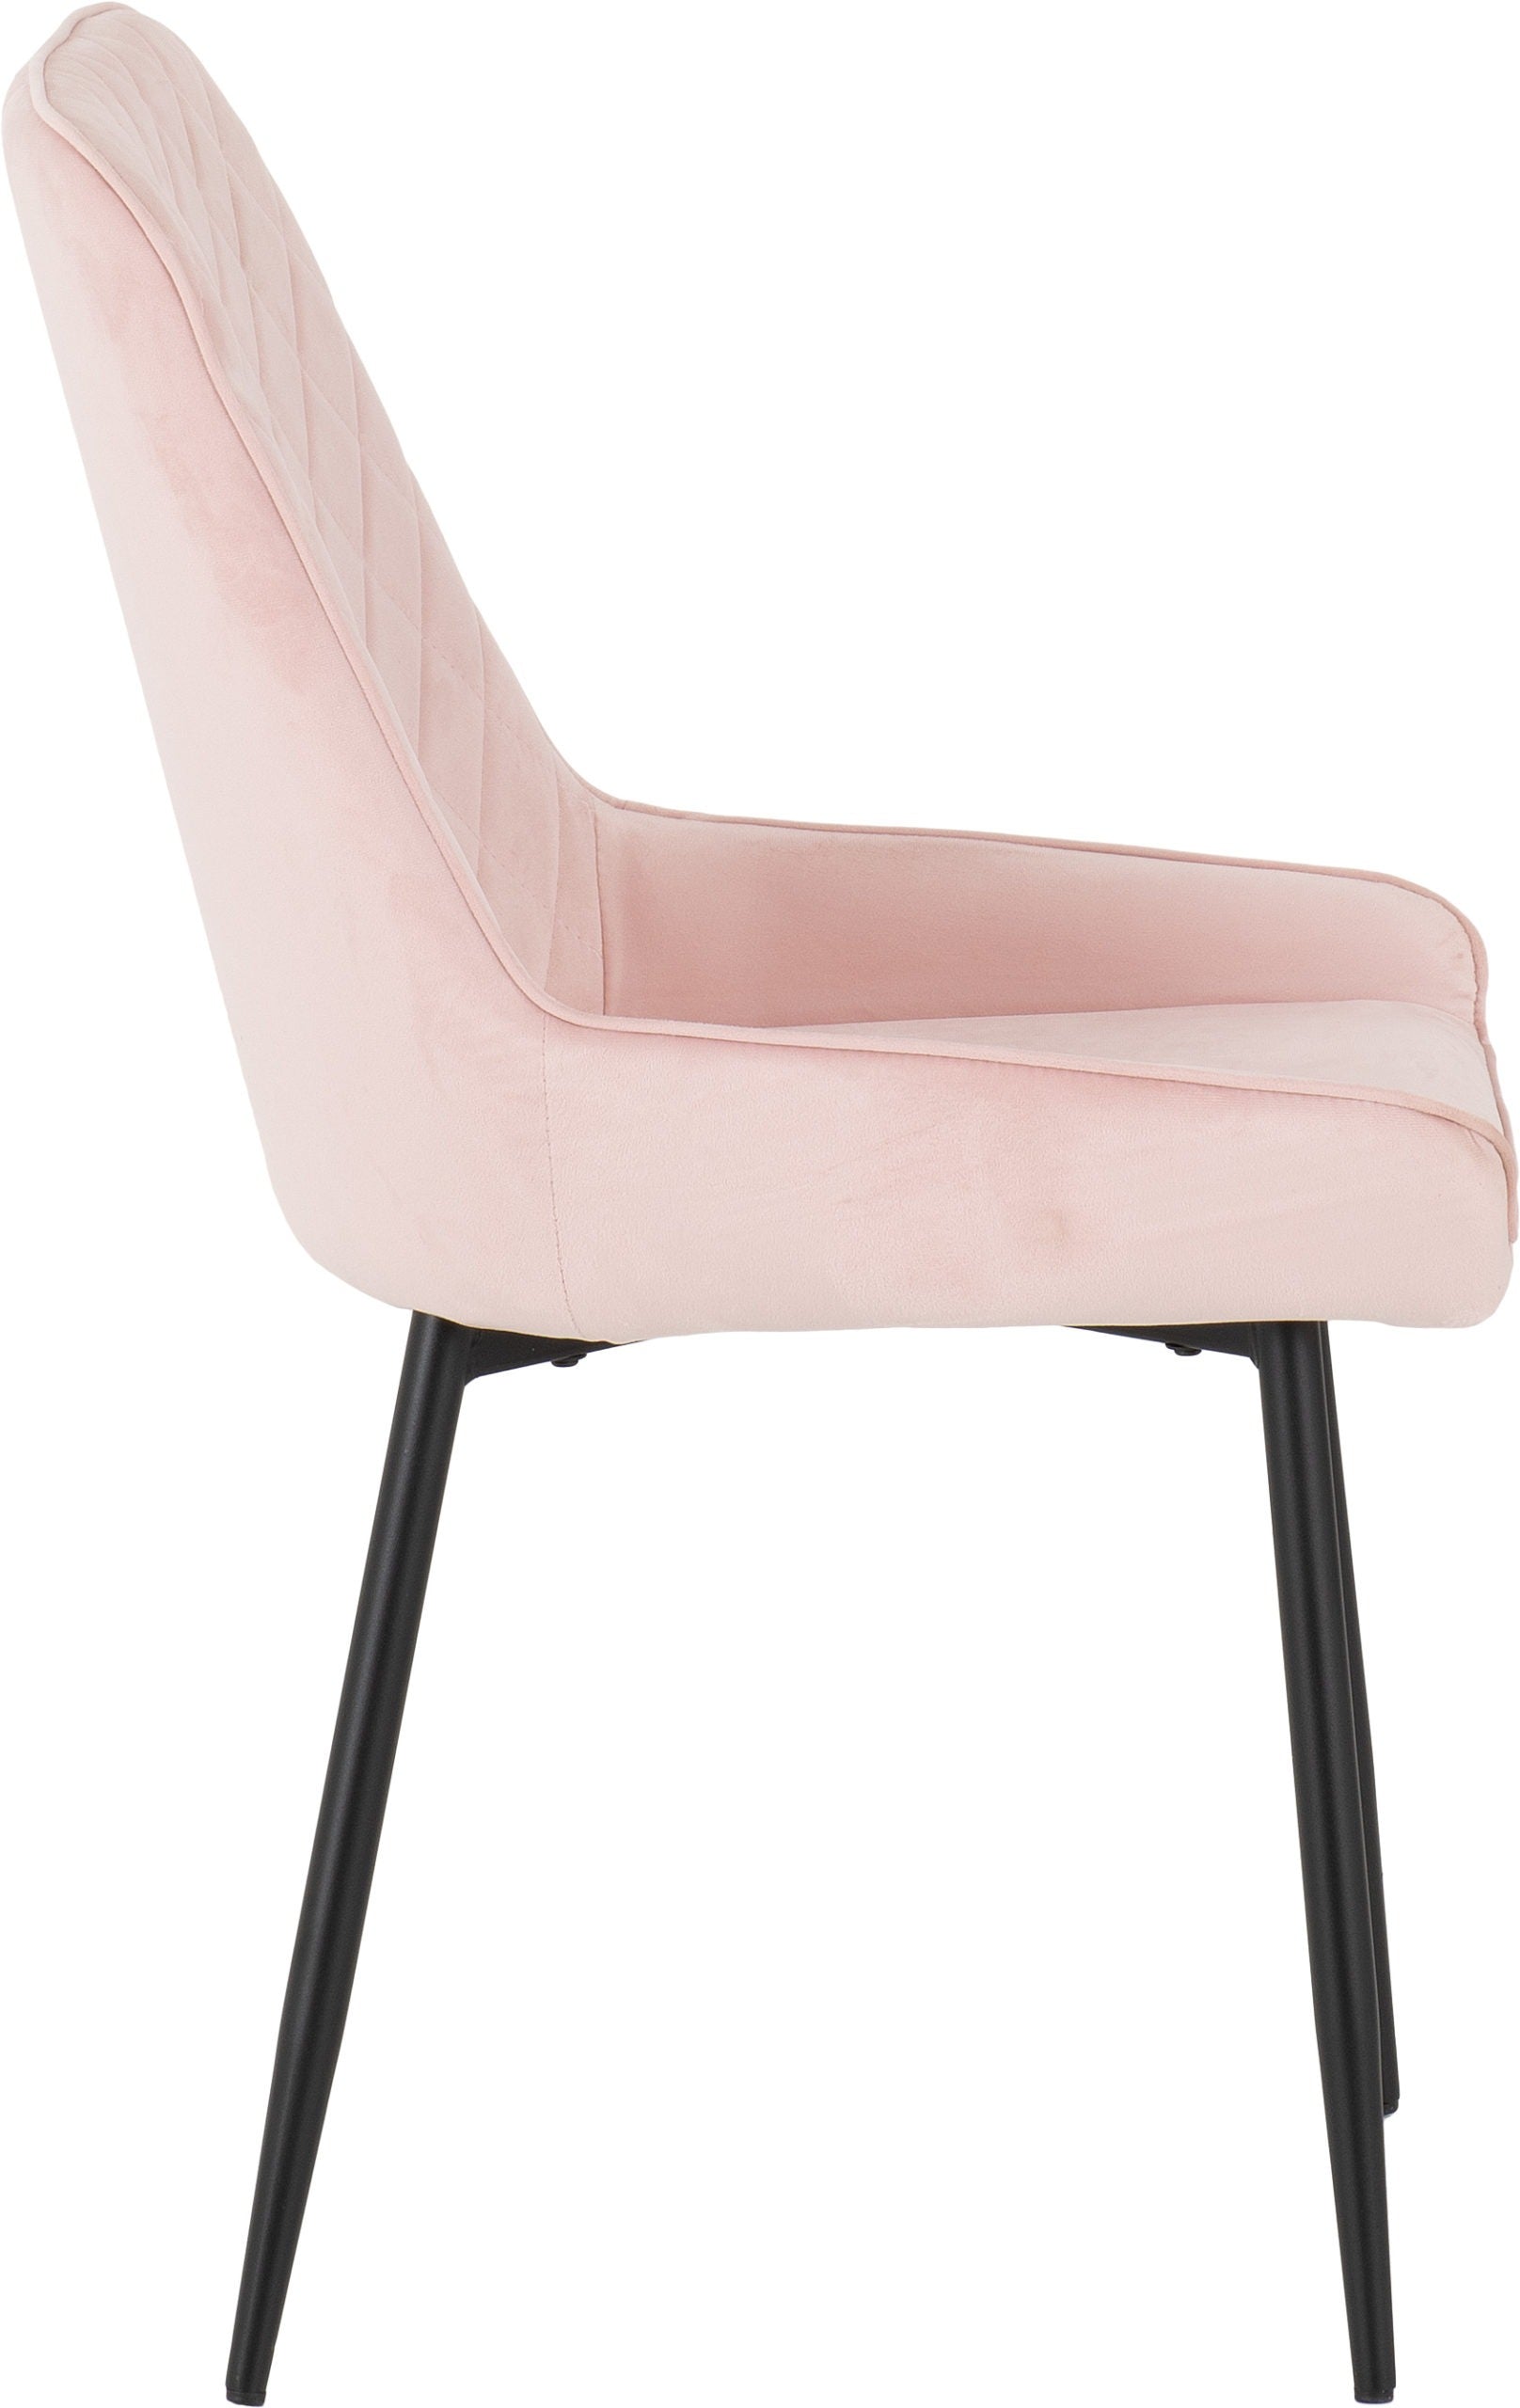 Avery Chairs -Black Frame /Baby Pink Upholstered